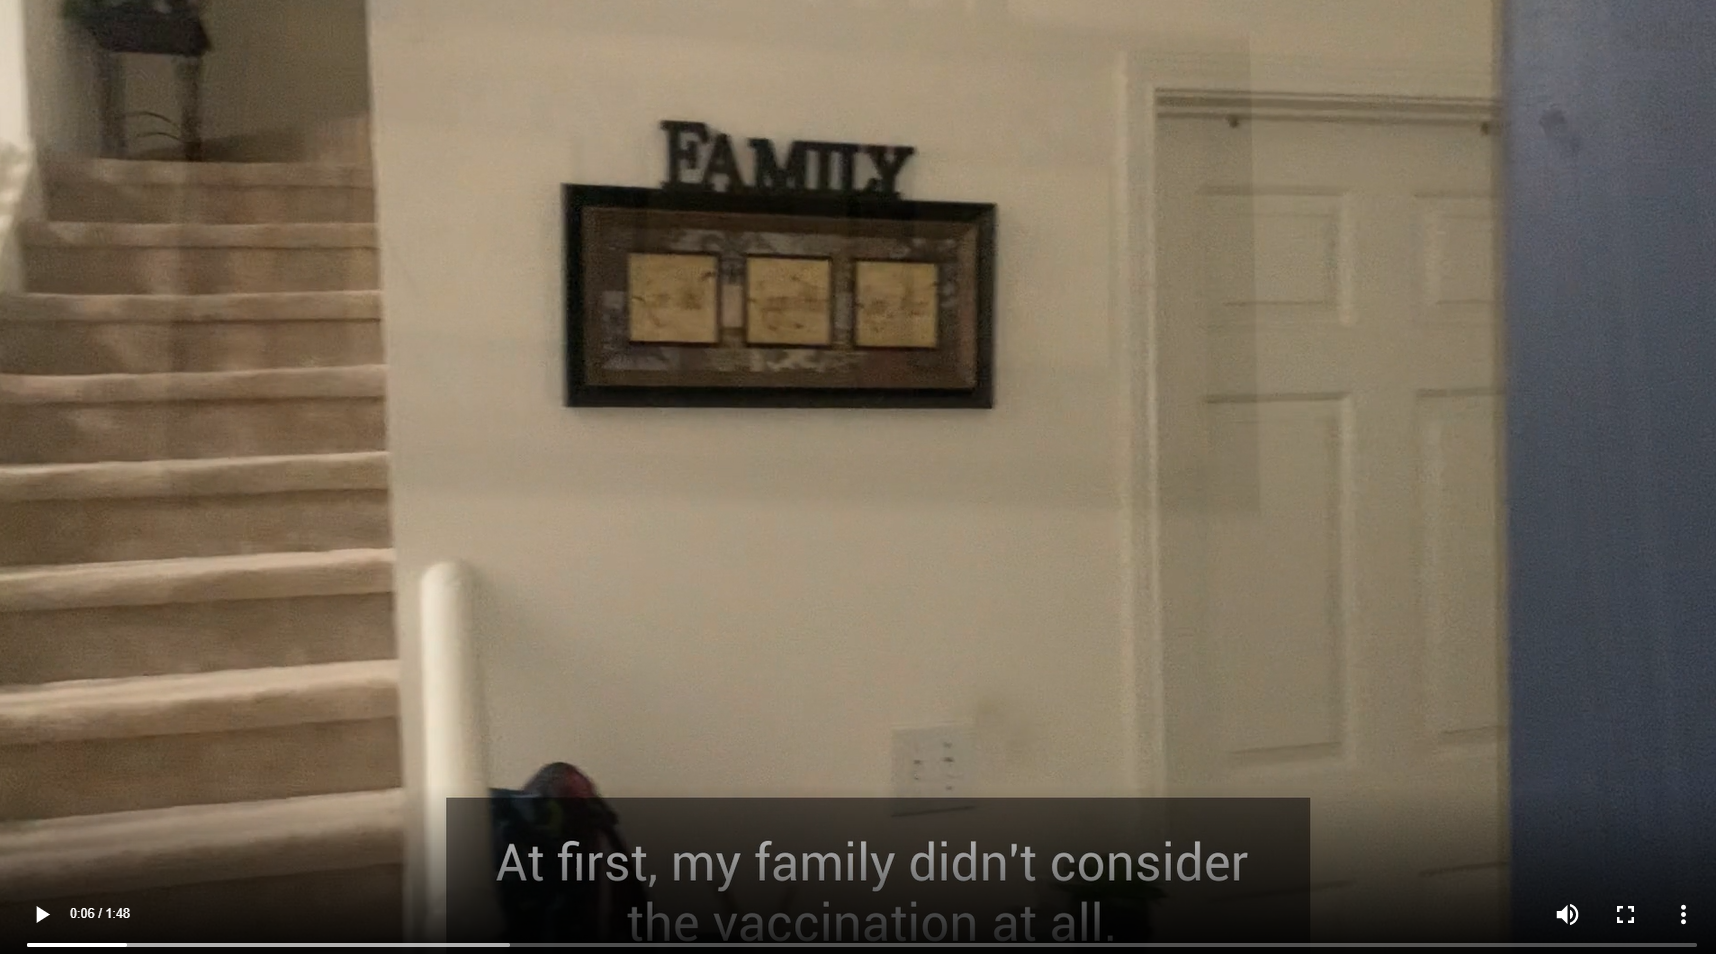 A family room shows a staircase and "family portrait" above English subtitles 